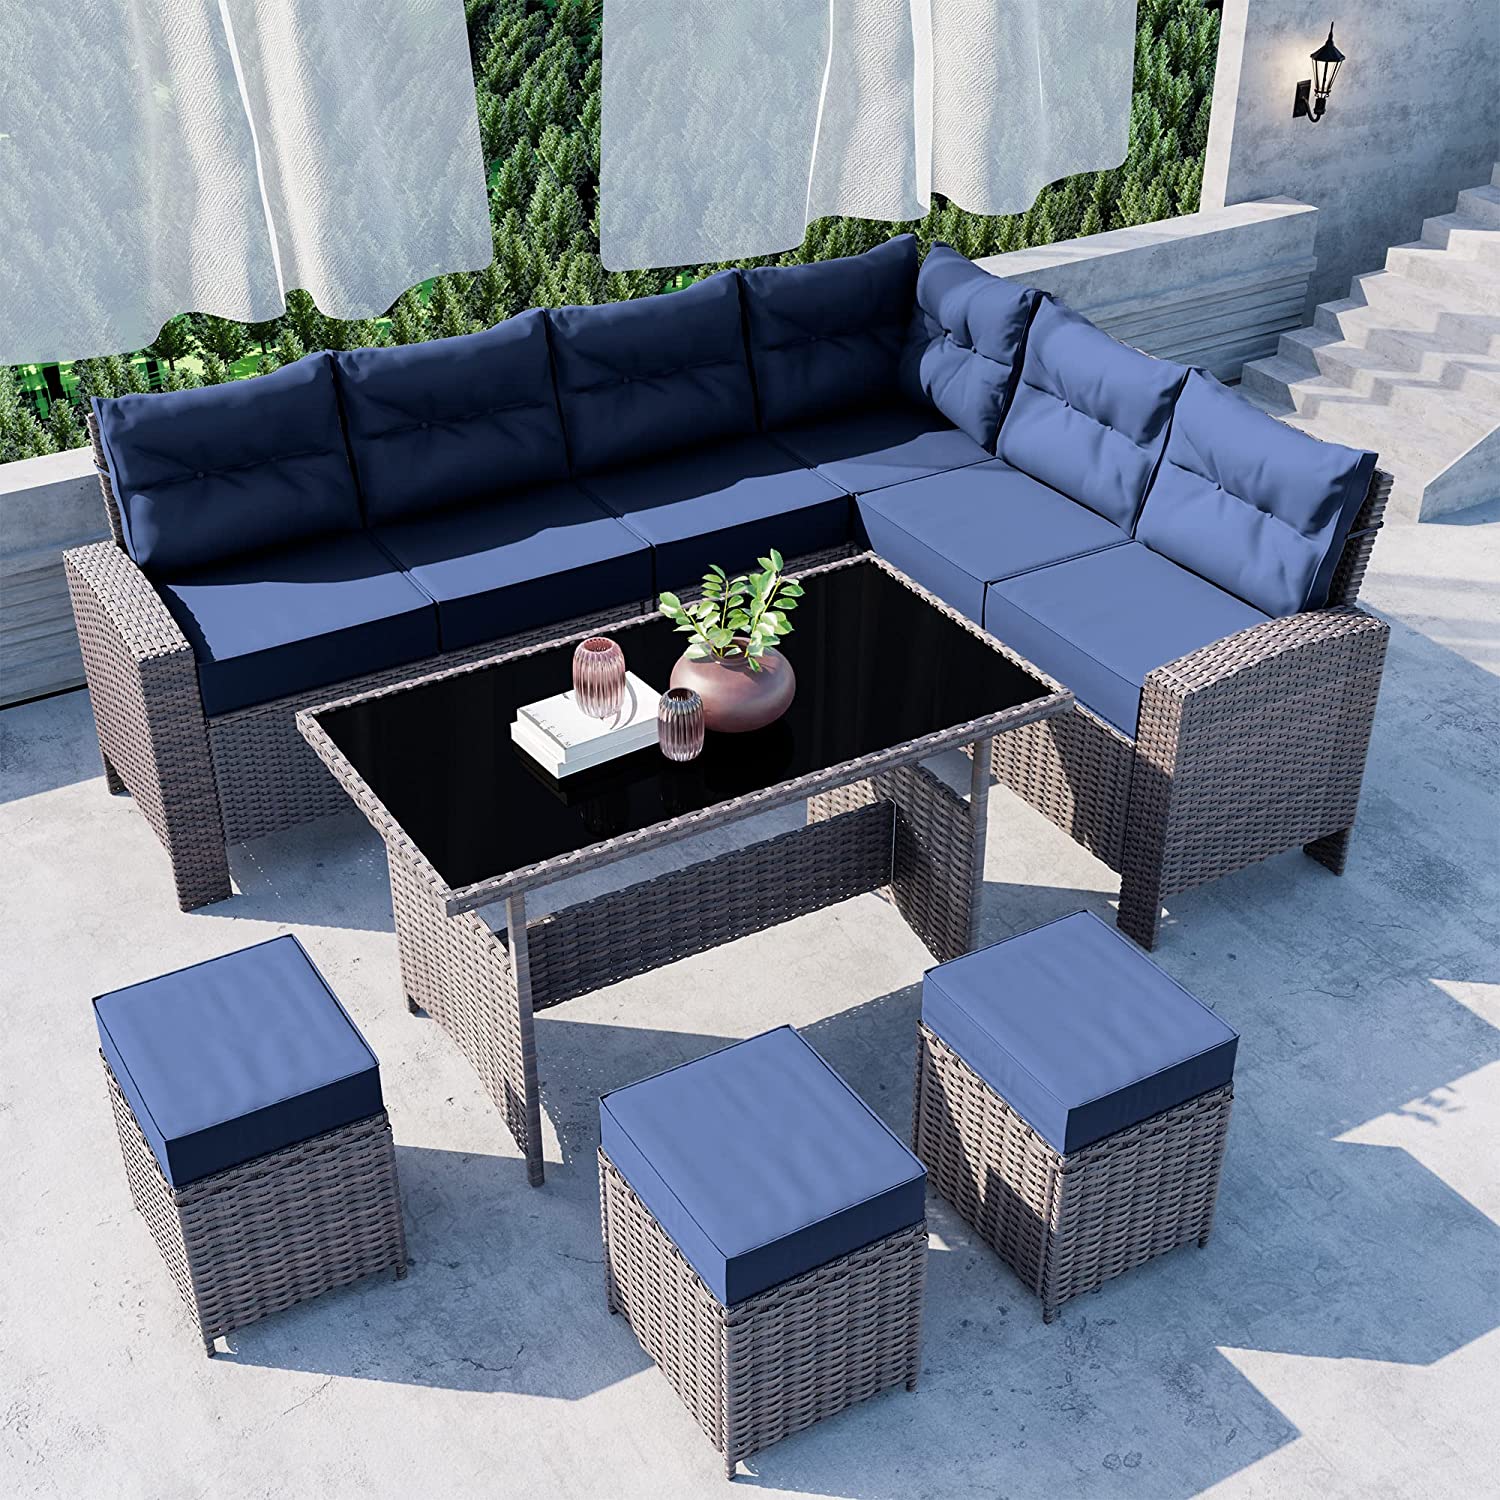 Kullavik 7 Pieces Outdoor Patio Furniture Set, All-Weather Patio Outdoor Dining Conversation Sectional Set with Coffee Table, Wicker Sofas, Ottomans, Removable Cushions,Navy Blue - image 1 of 7